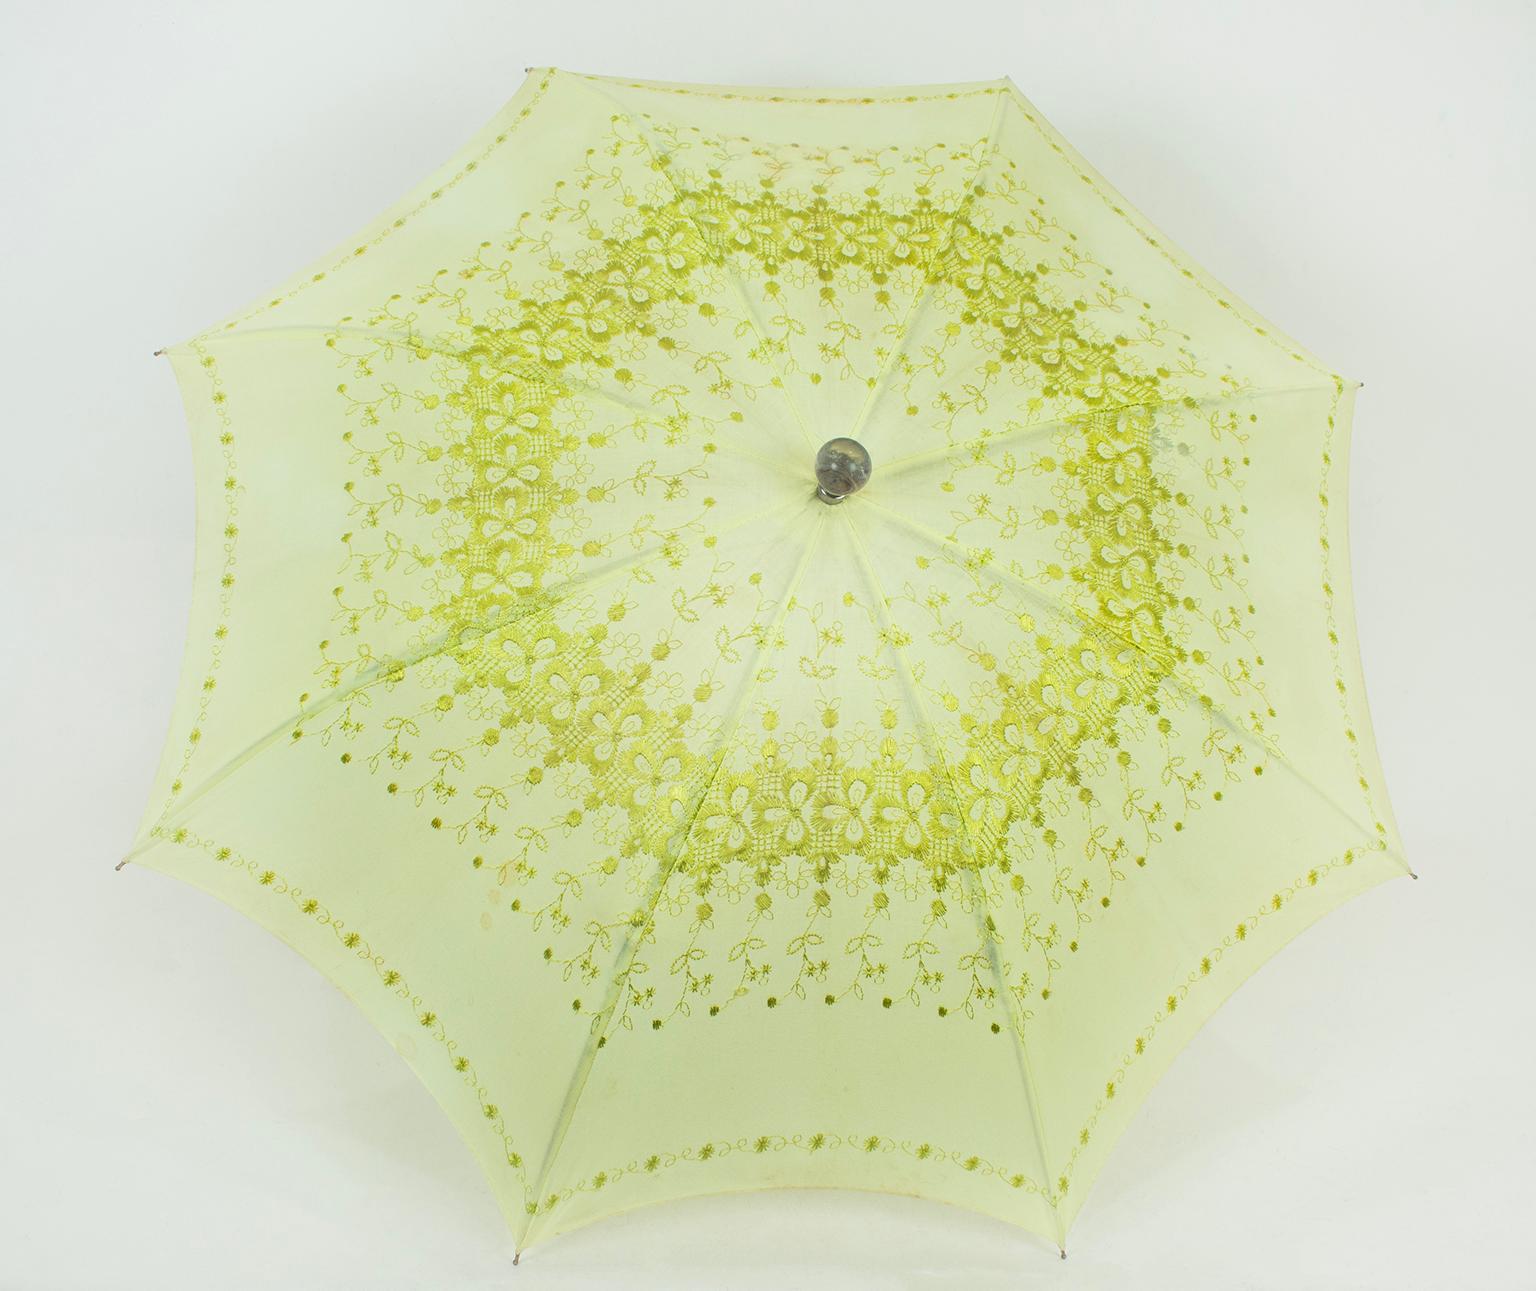 Though this umbrella was likely a part of a mid-century ensemble complete with matching day dress and shoes, the parasol itself is a prize. In cheerful soft lime chartreuse cotton, it straddles both Victorian and modern eras thanks to its delicate